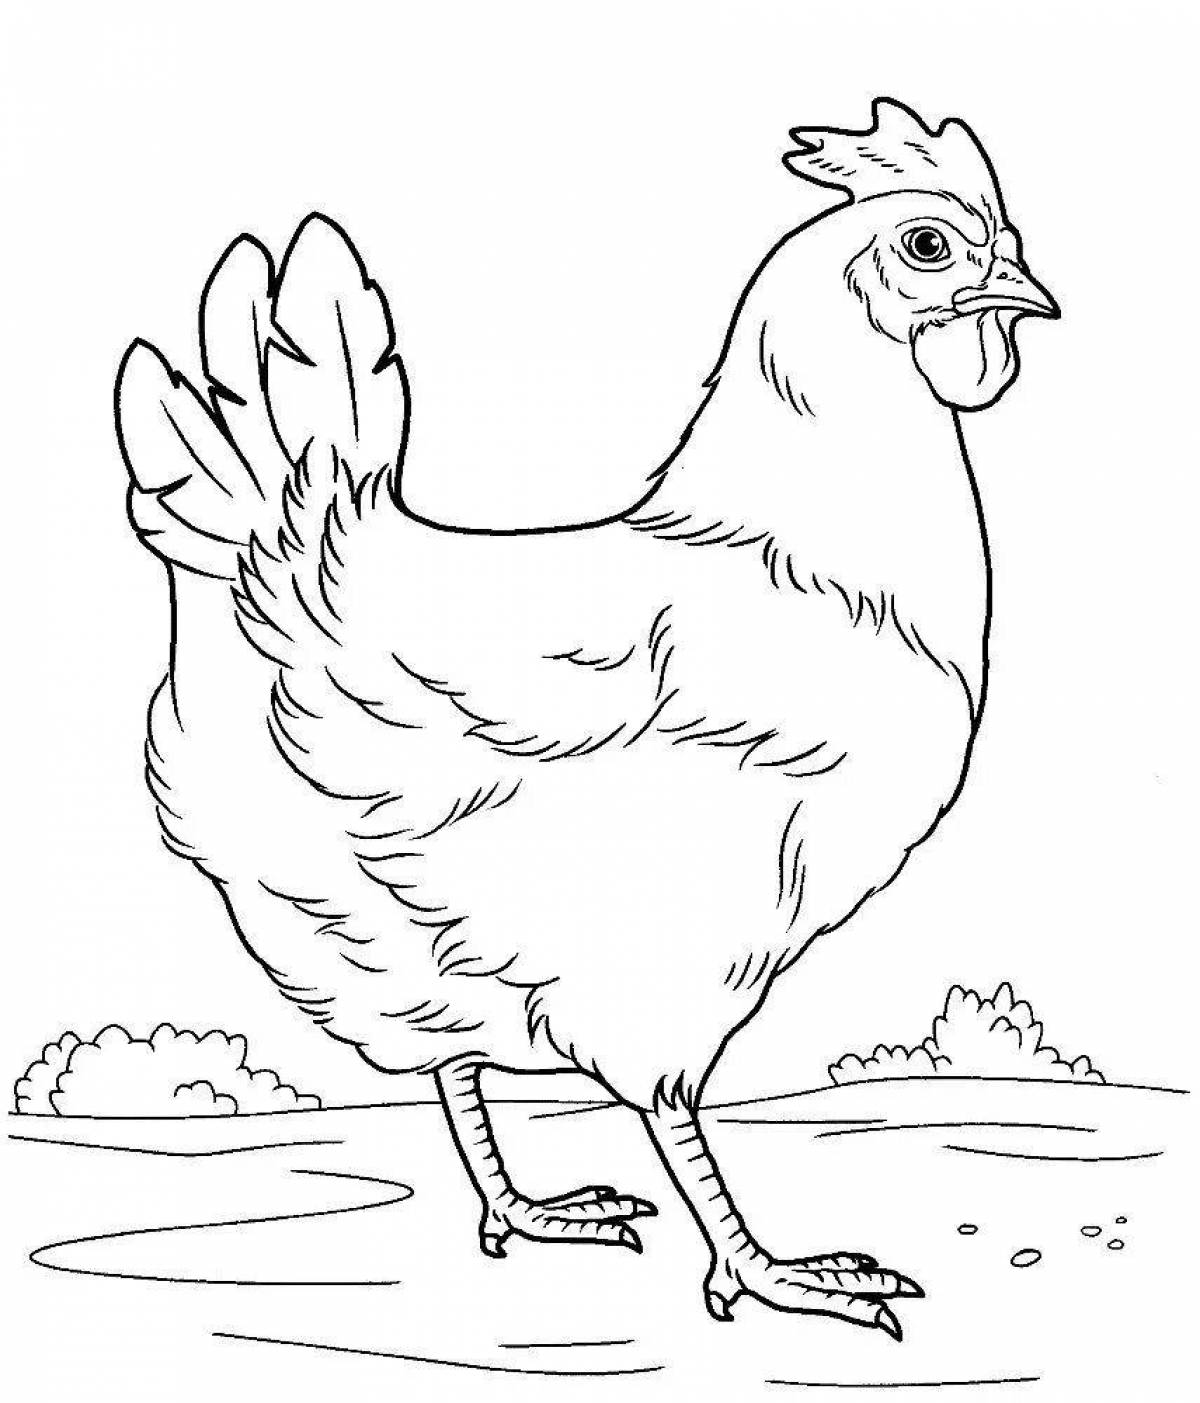 Chicken coloring book for kids